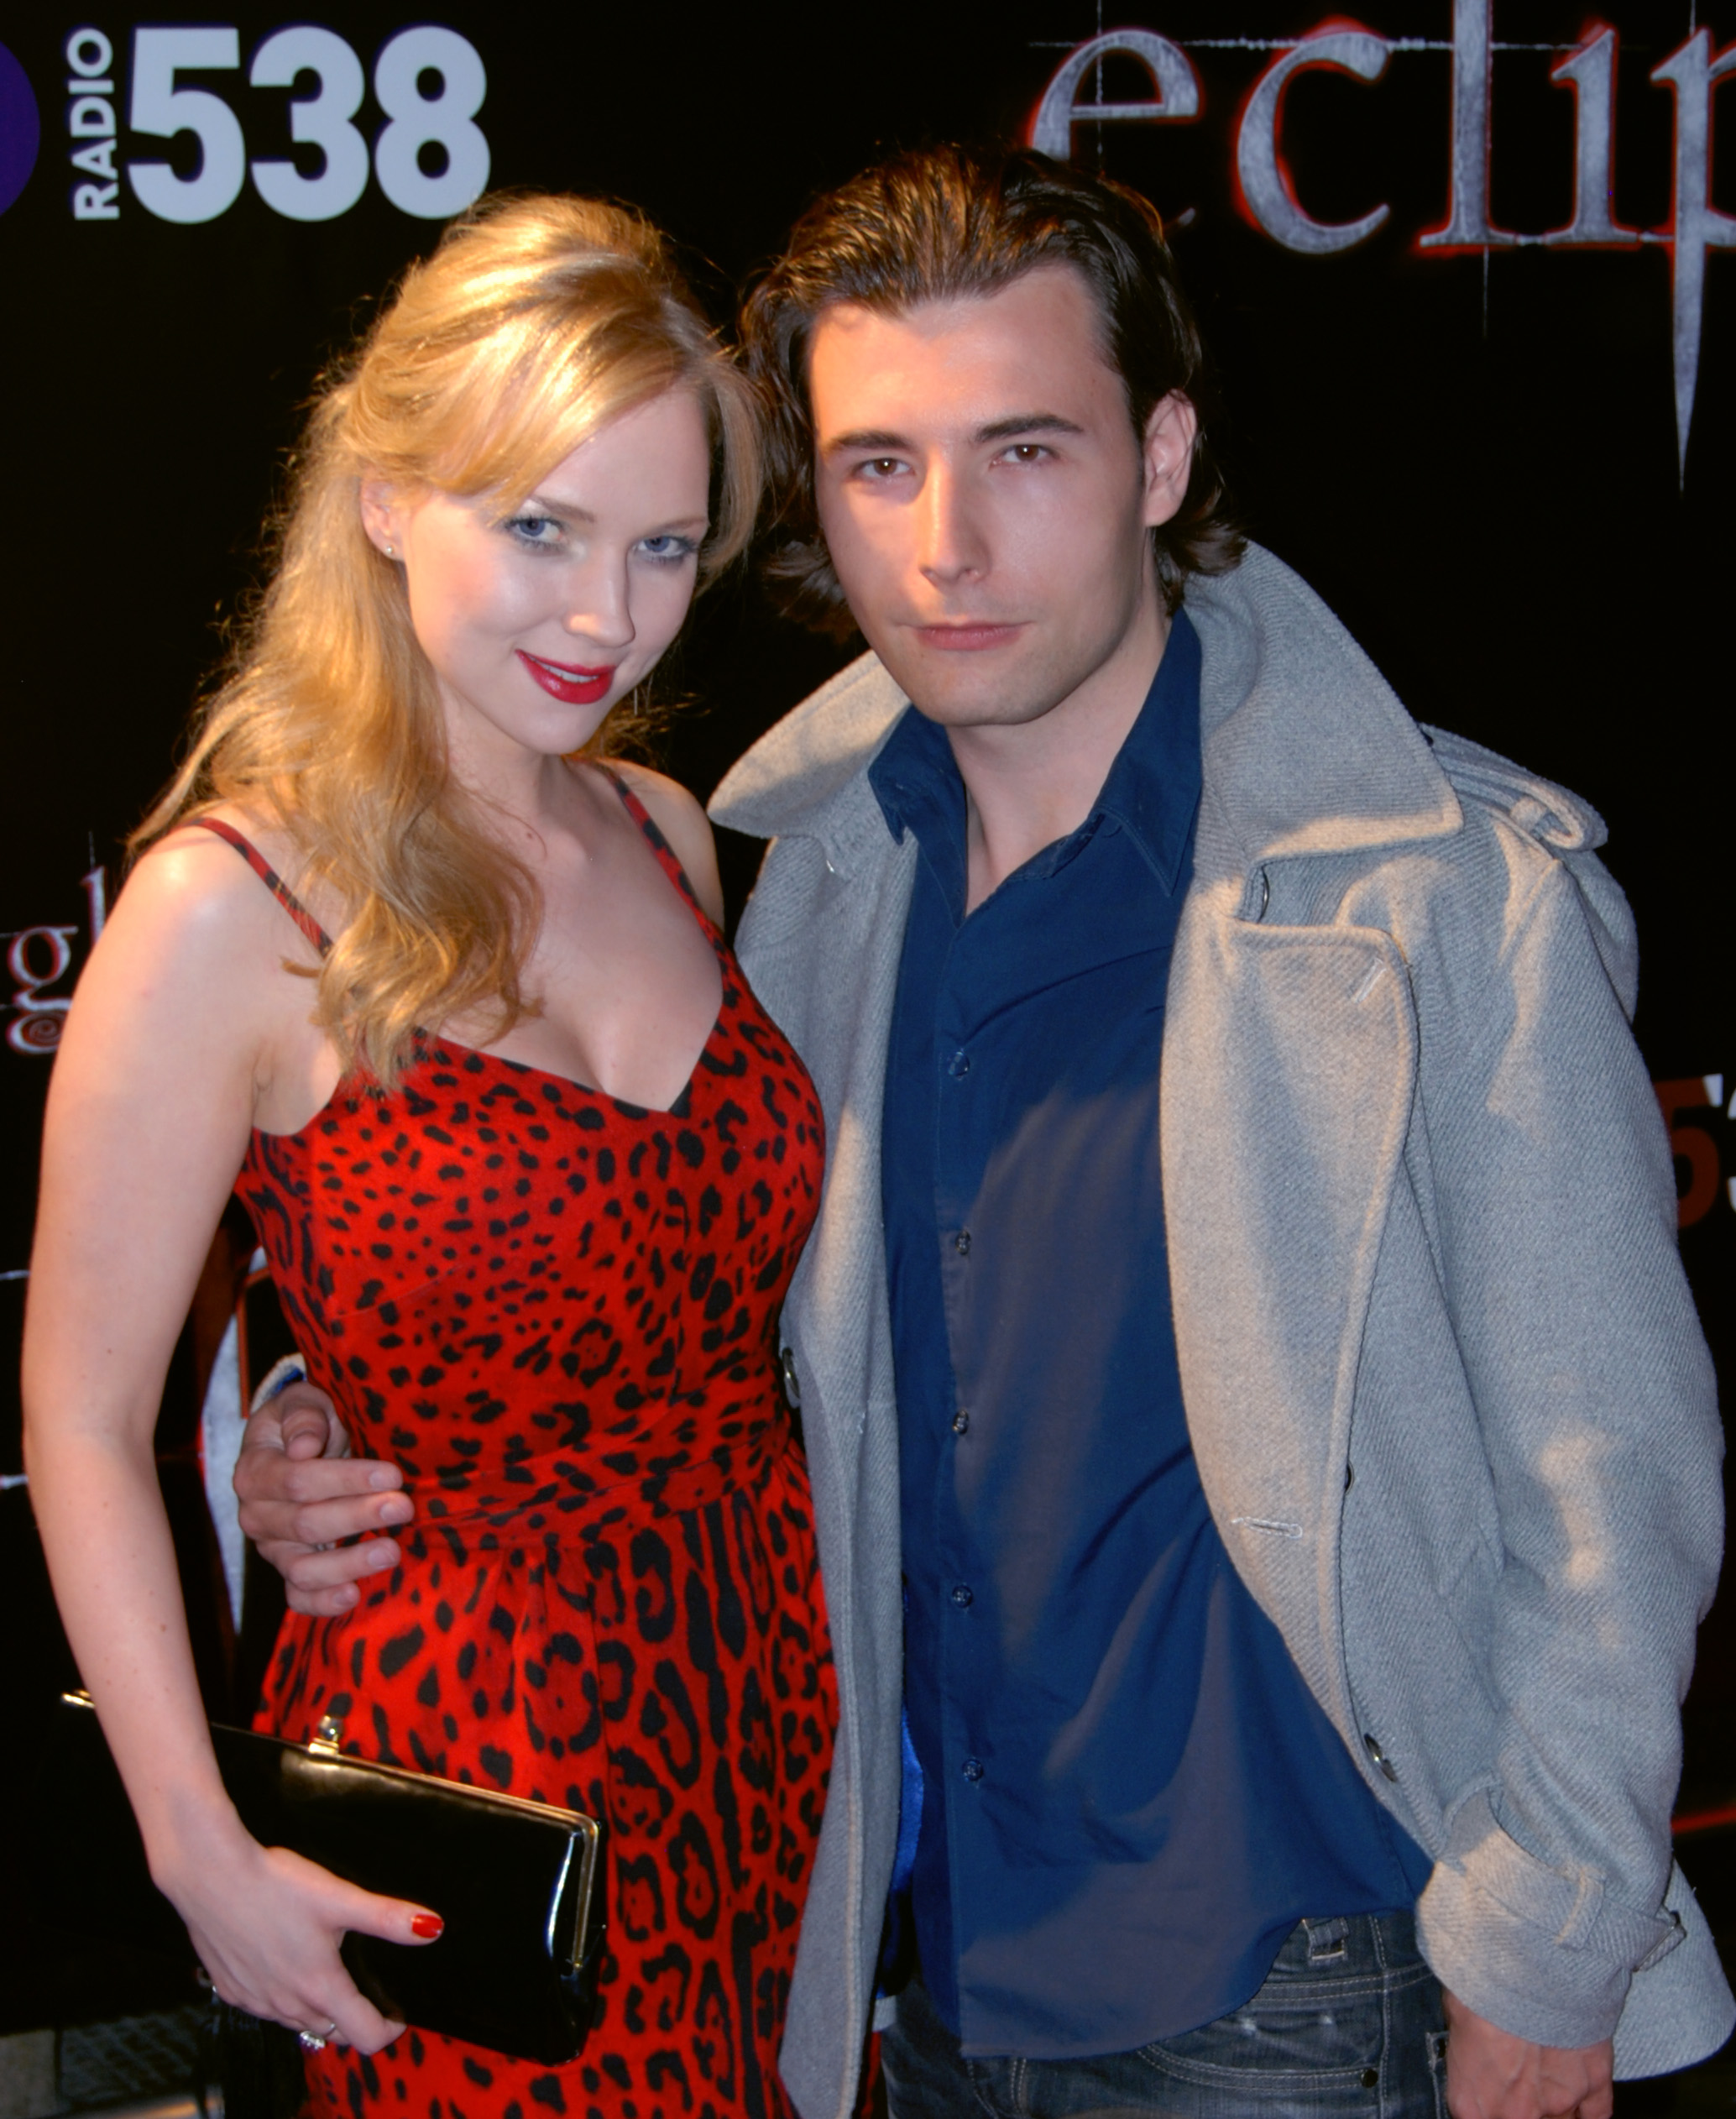 Vincent van Ommen and Ancilla Tilia at the premiere of The Twilight Saga: Eclipse, June, 2010 in Amsterdam, The Netherlands.